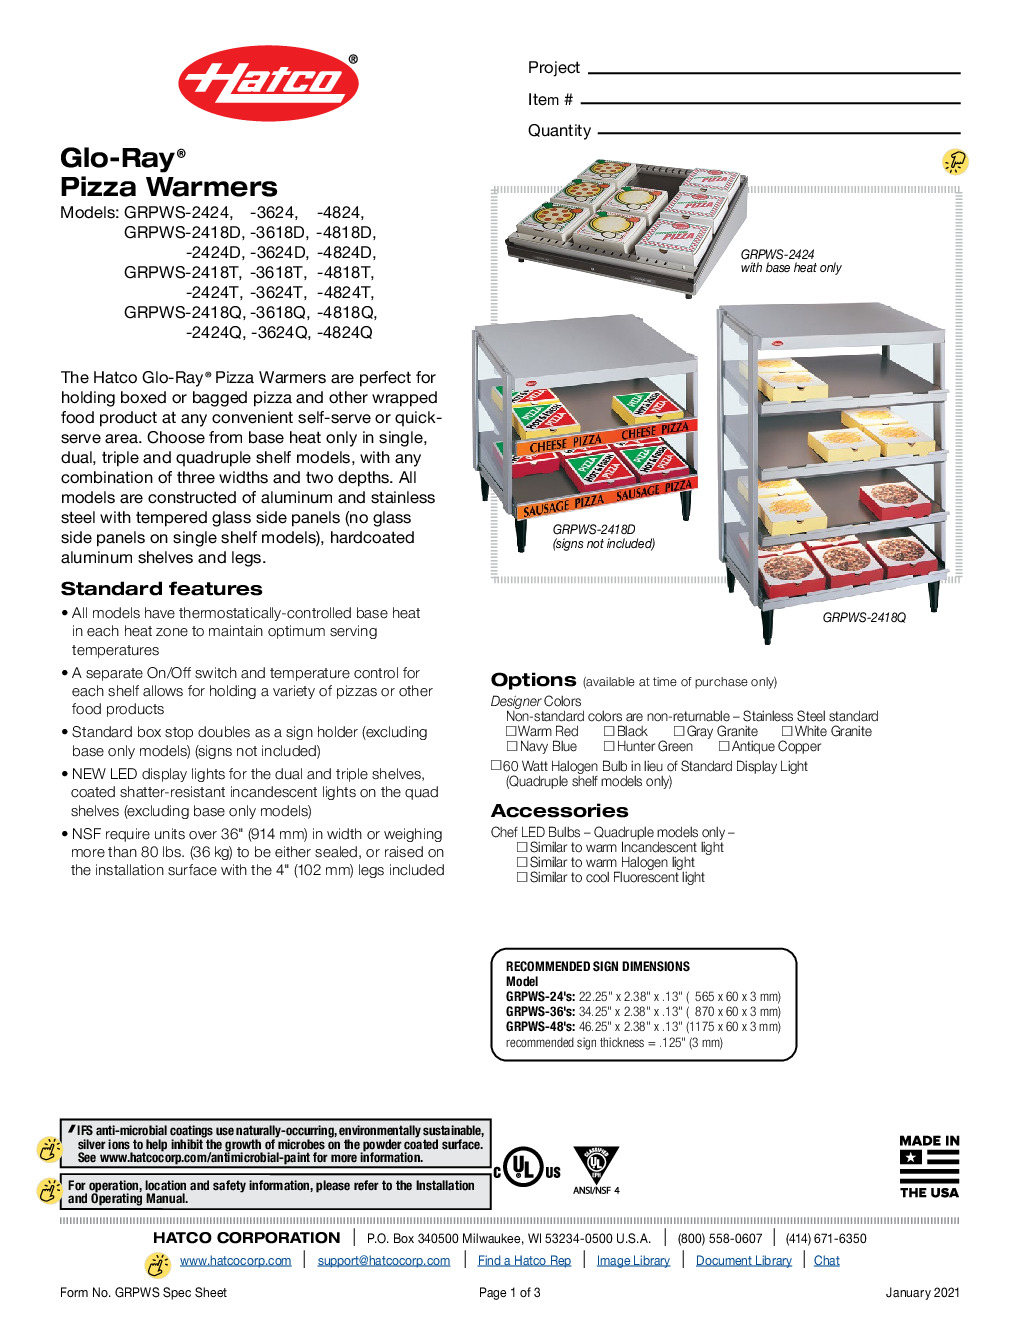 Hatco GRPWS-2418T For Multi-Product Heated Display Merchandiser